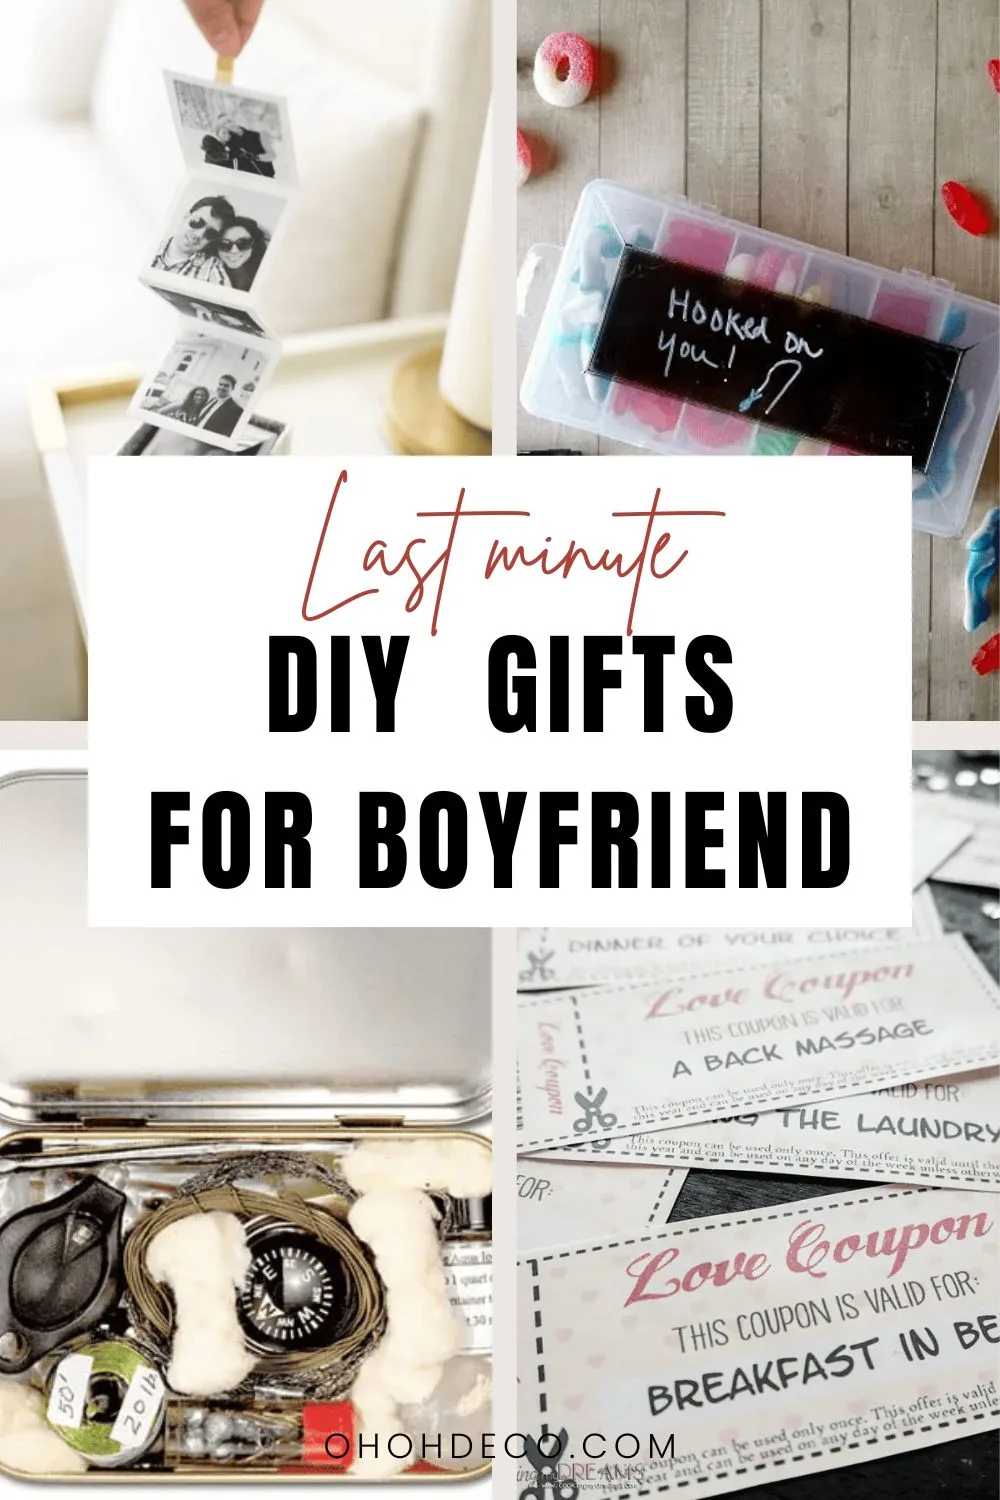 Last Minute DIY Gifts for Your Boyfriend: Show Your Love with a